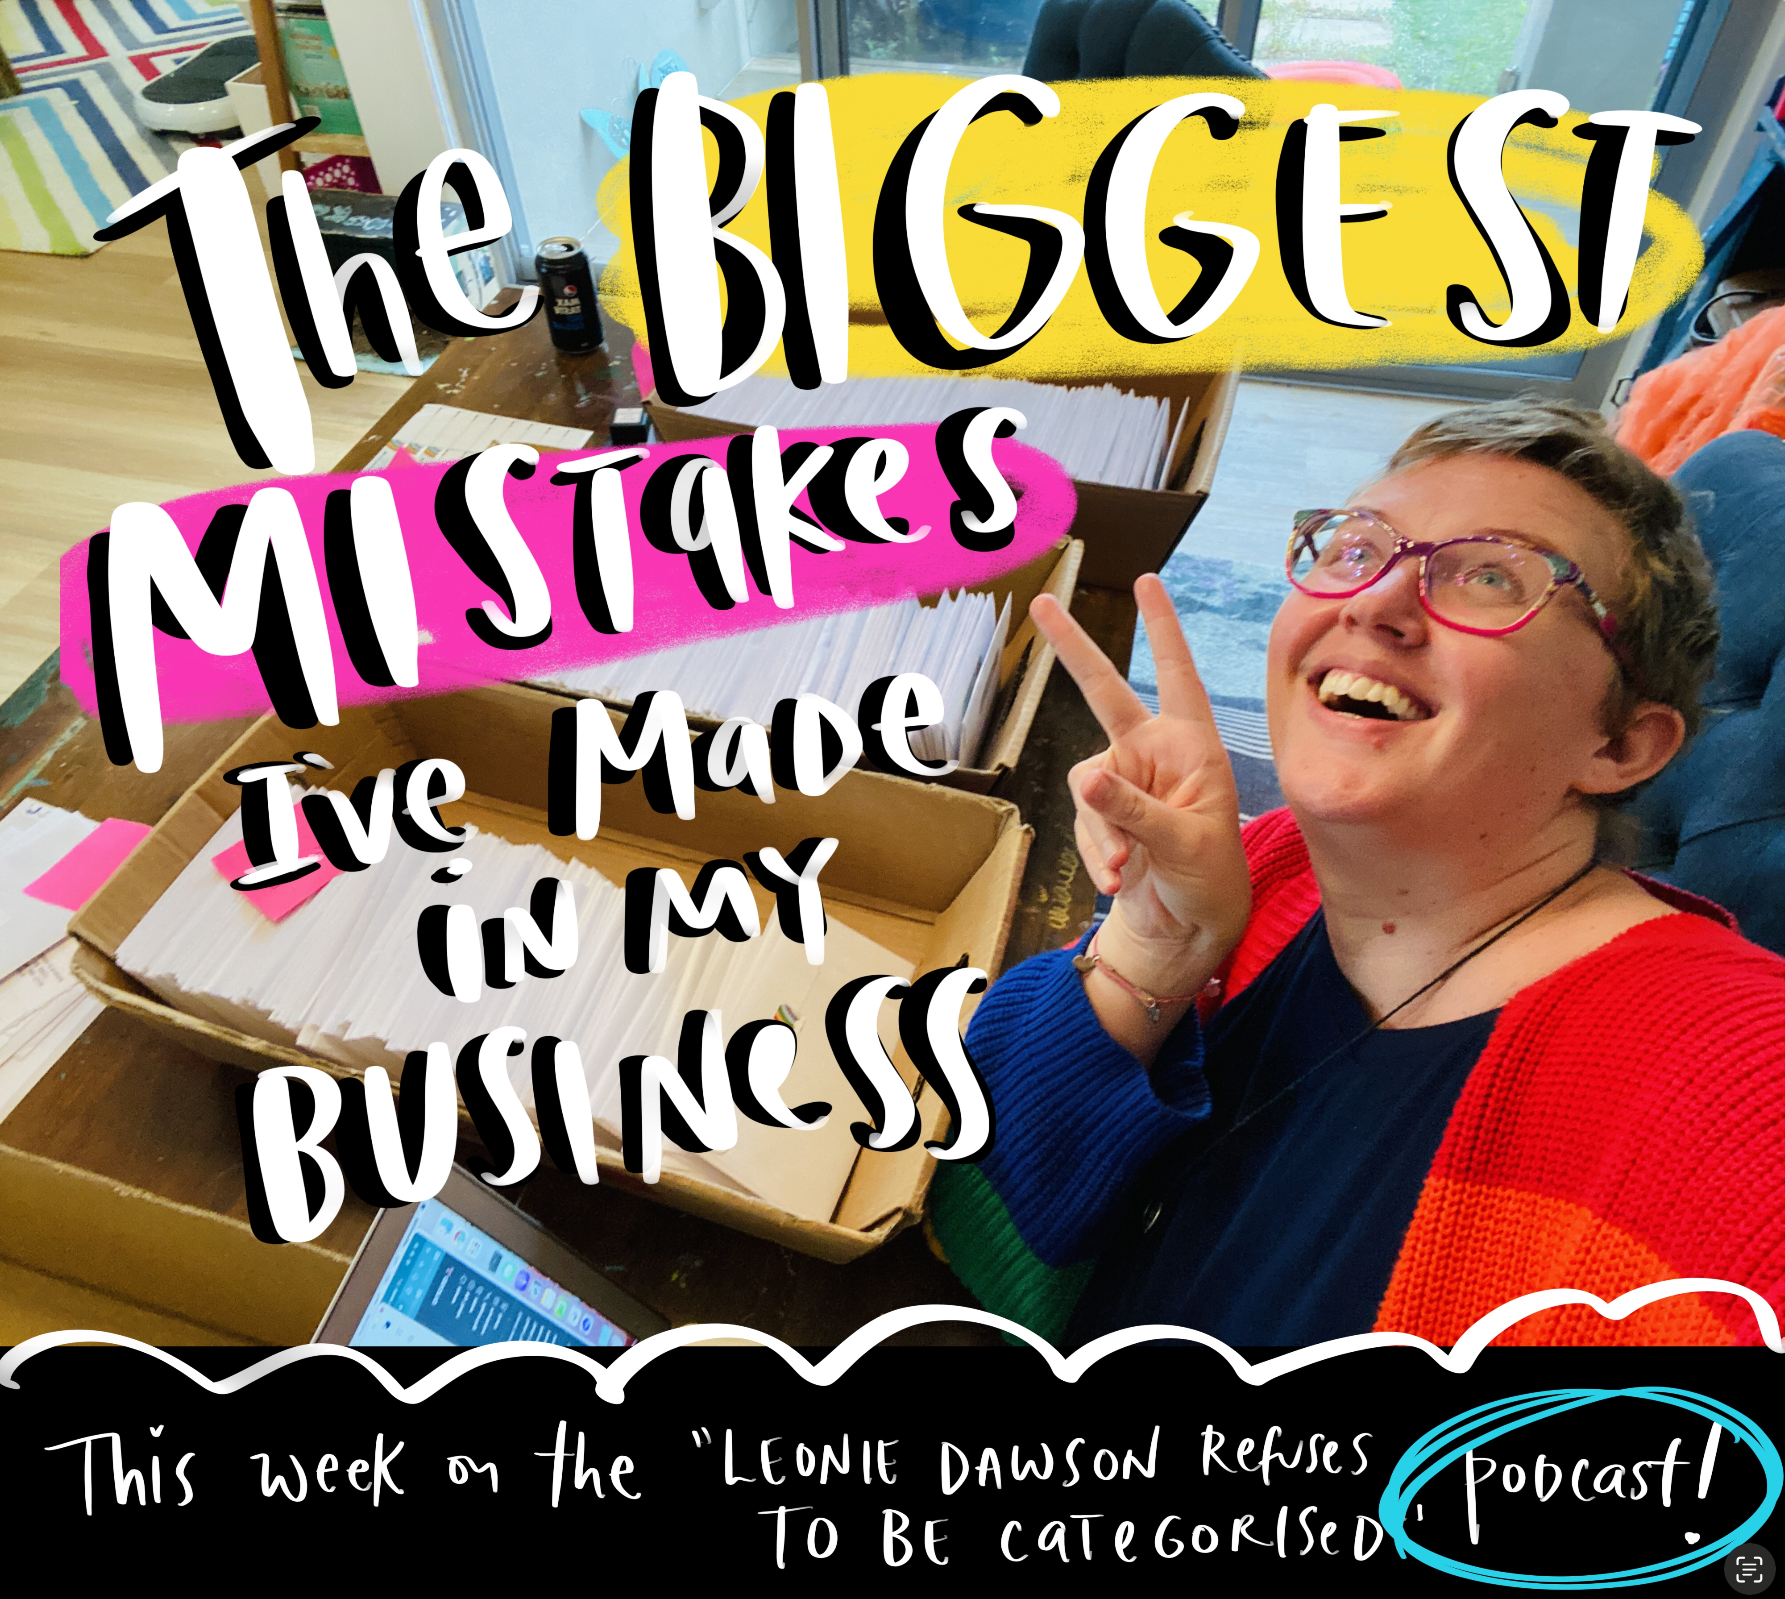 The Biggest Mistakes I've Made In My Business